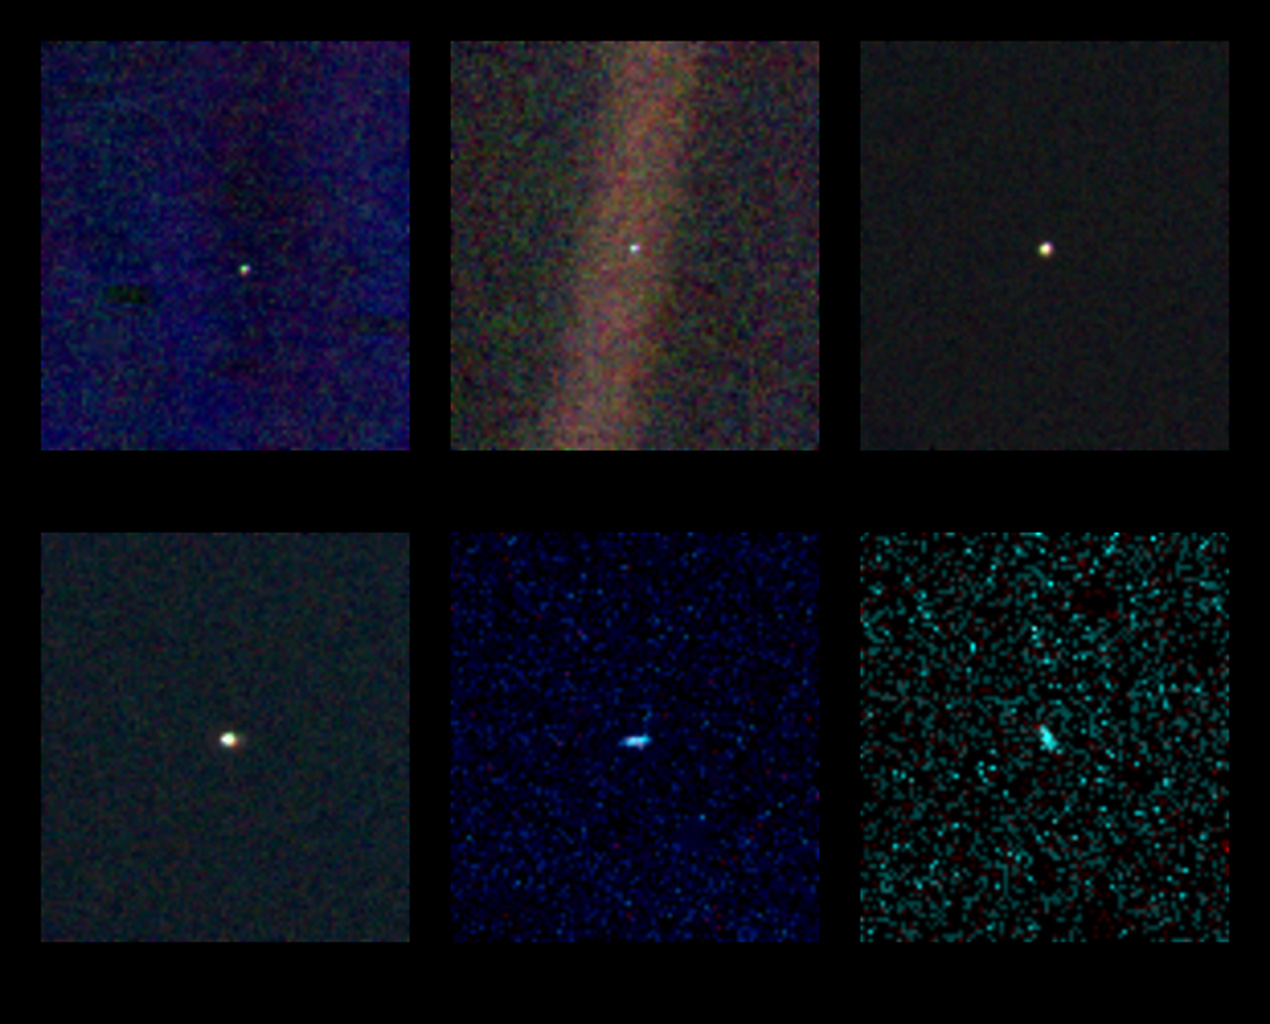 Space Images Solar System Portrait Views Of 6 Planets